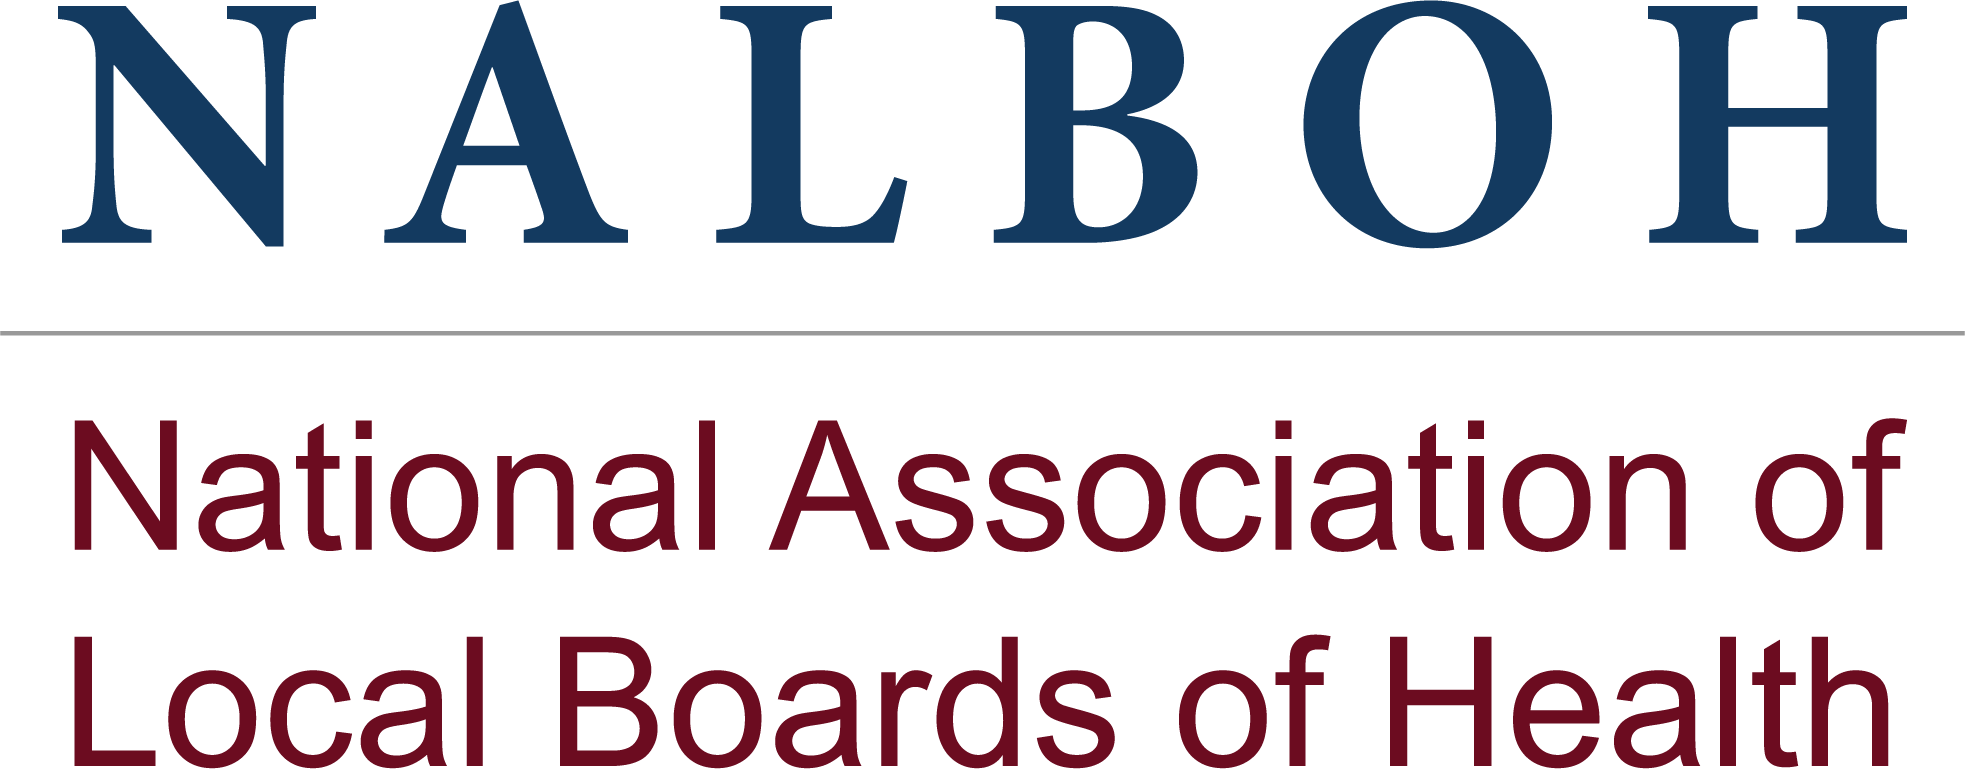 National Association of Local Boards of Health